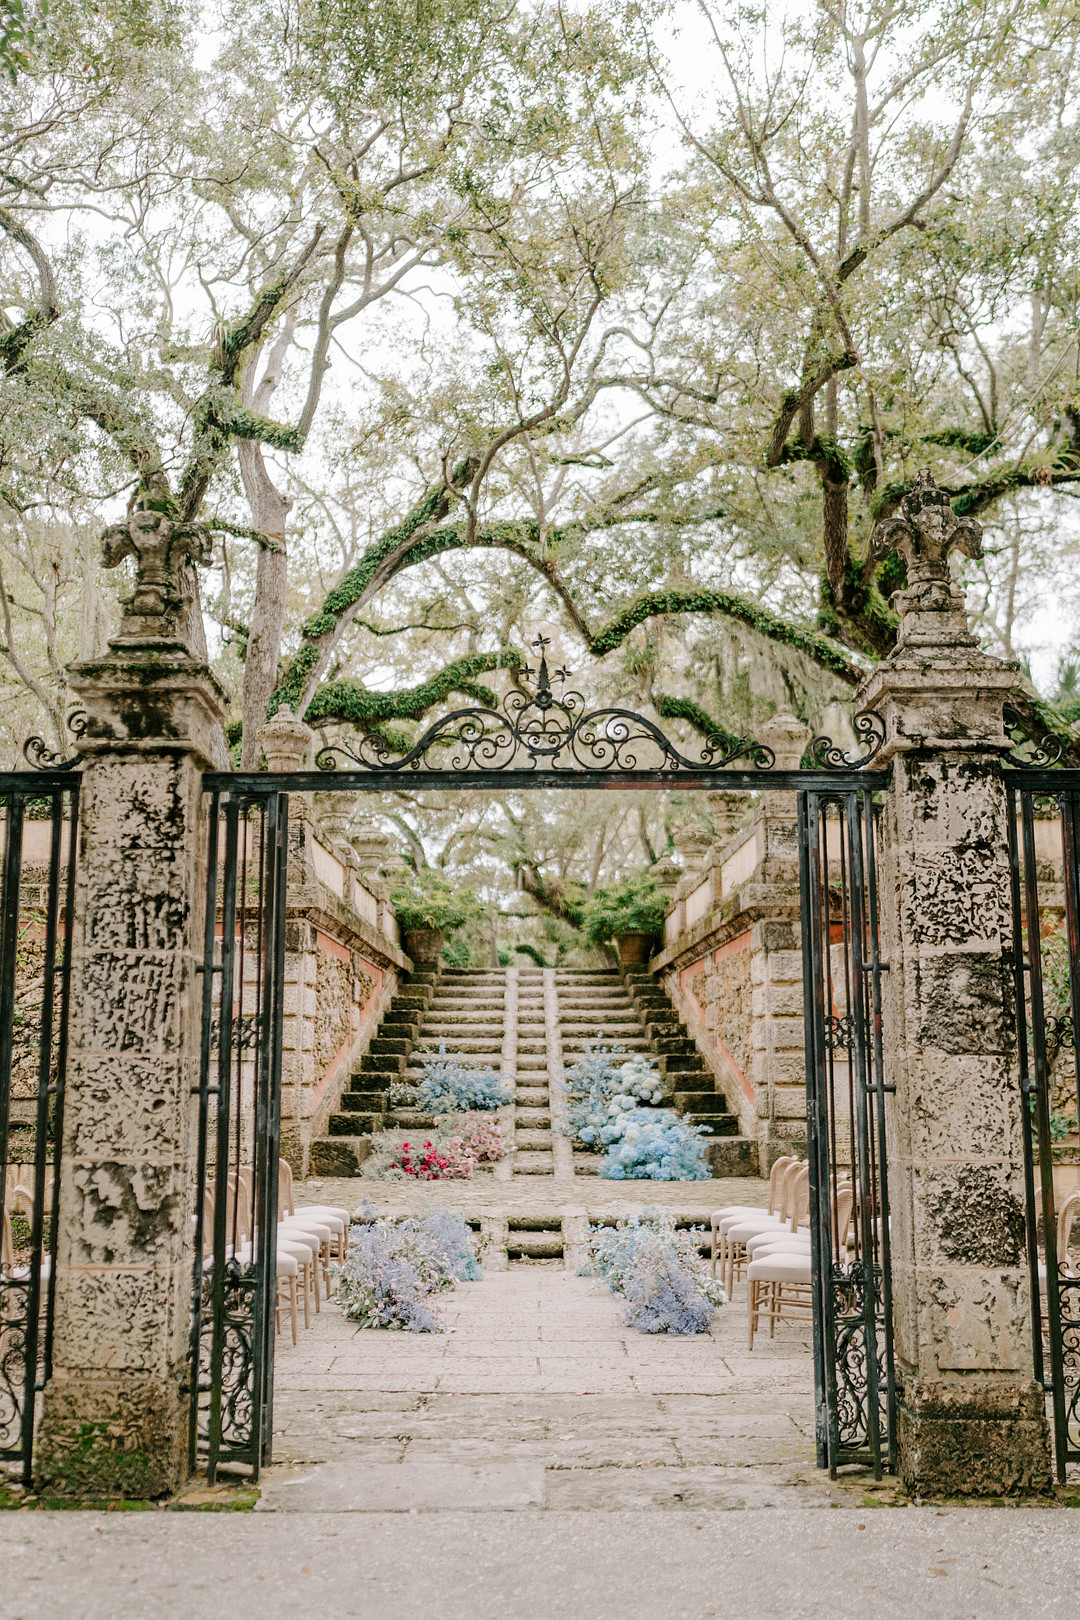 A wrought iron gate leads to a stone staircase overflowing with colorful flowers for a picturesque outdoor wedding ceremony.